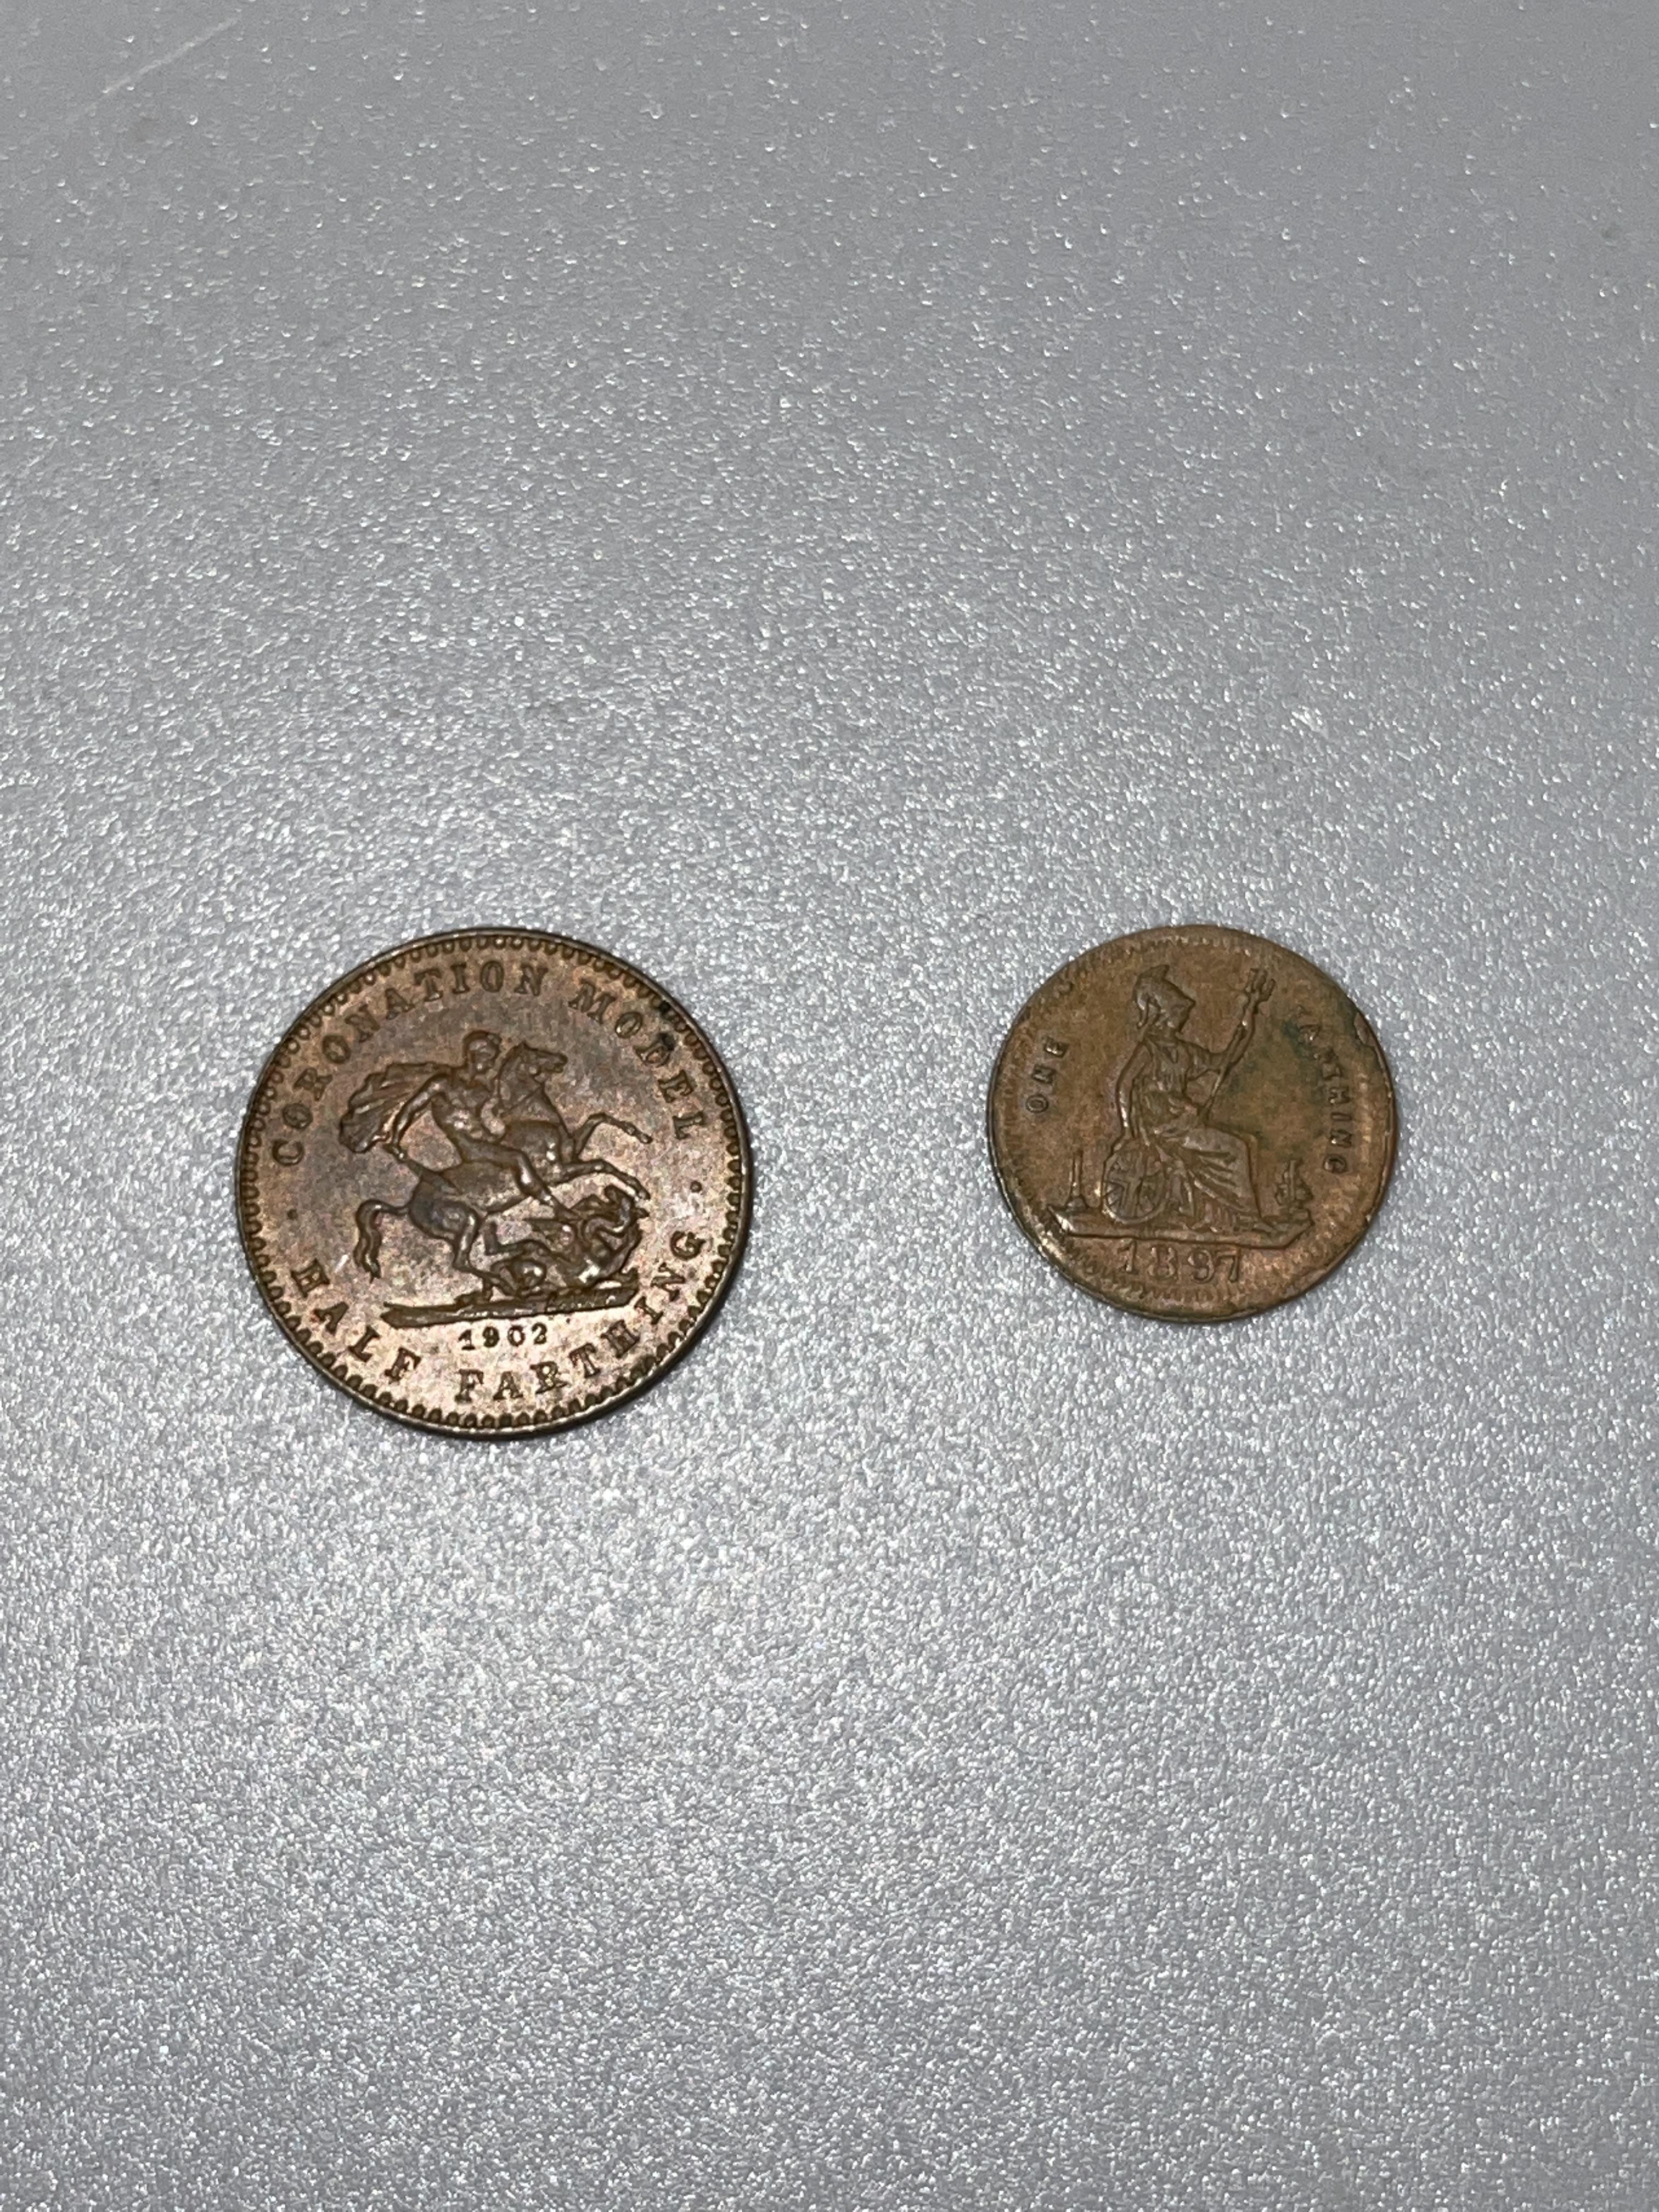 High grade Half and third farthings and model coin - Image 4 of 6